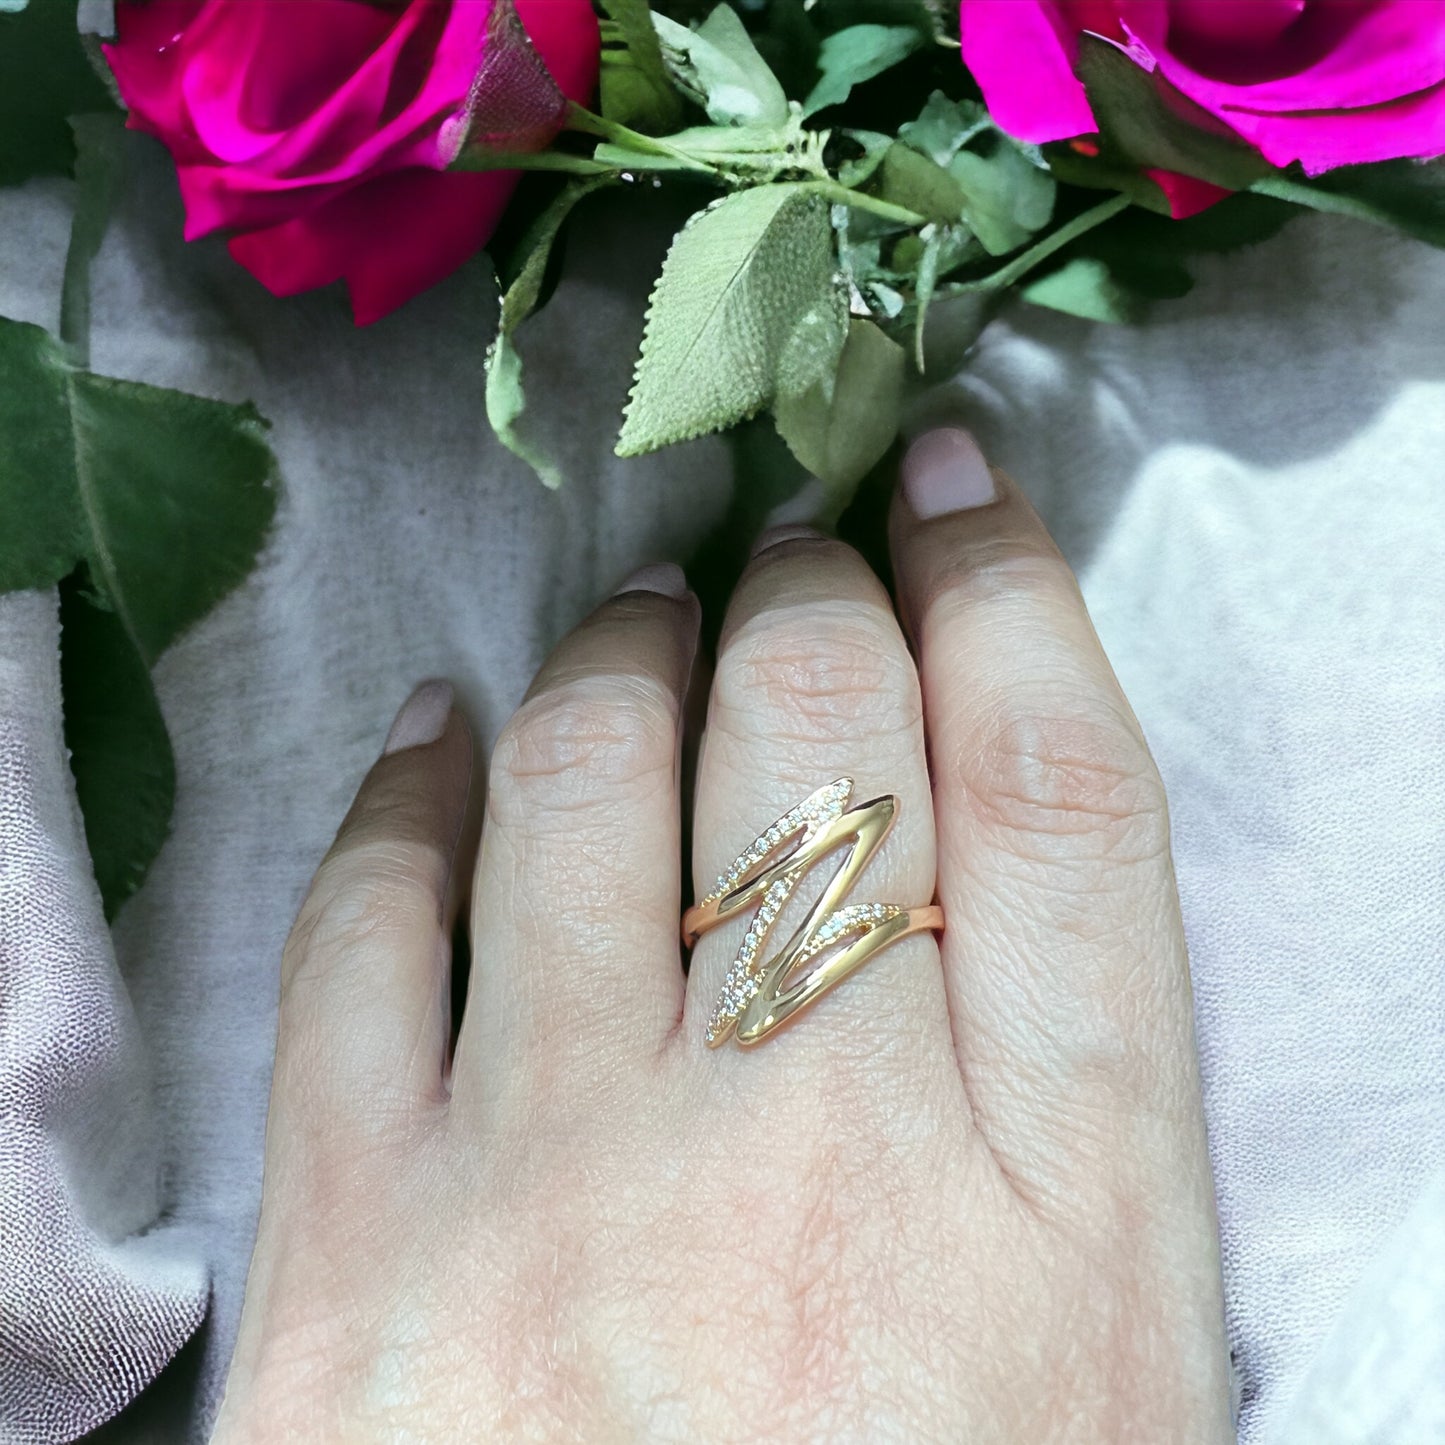 Zigzag 18k Gold Rings With White Stones For Women